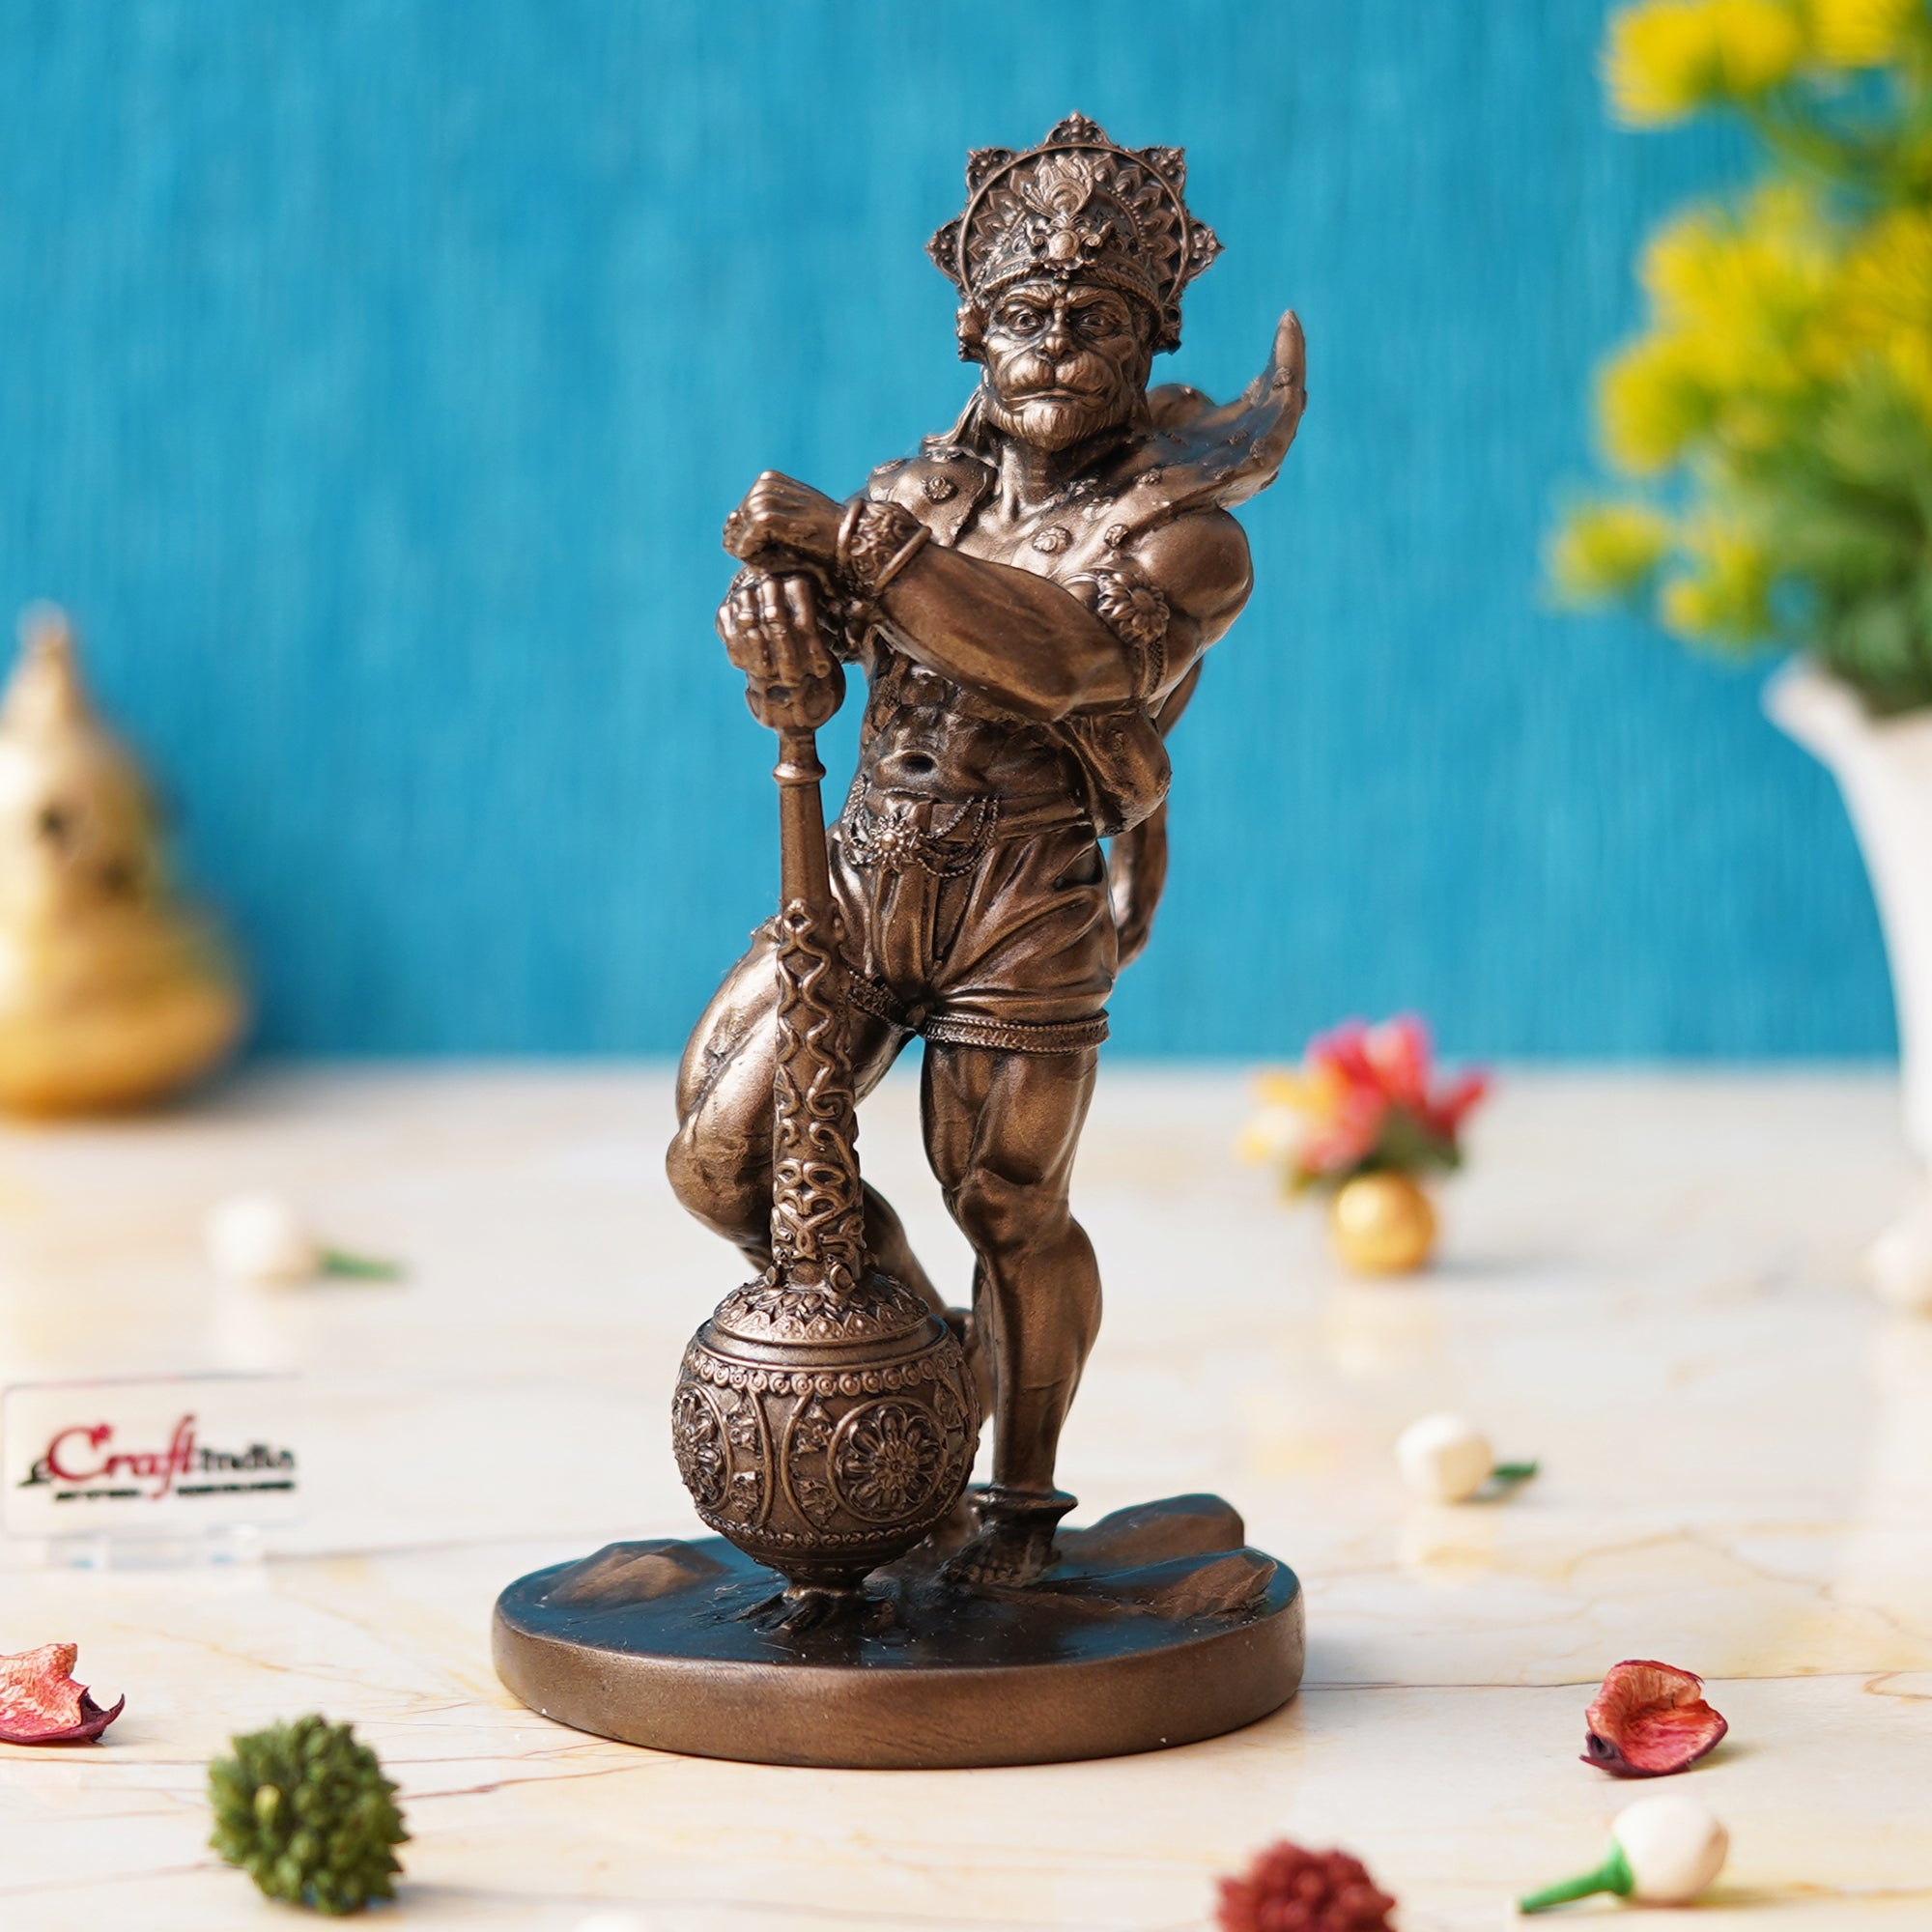 Golden Polyresin Handcrafted Standing Lord Hanuman Statue with Gada/Mace